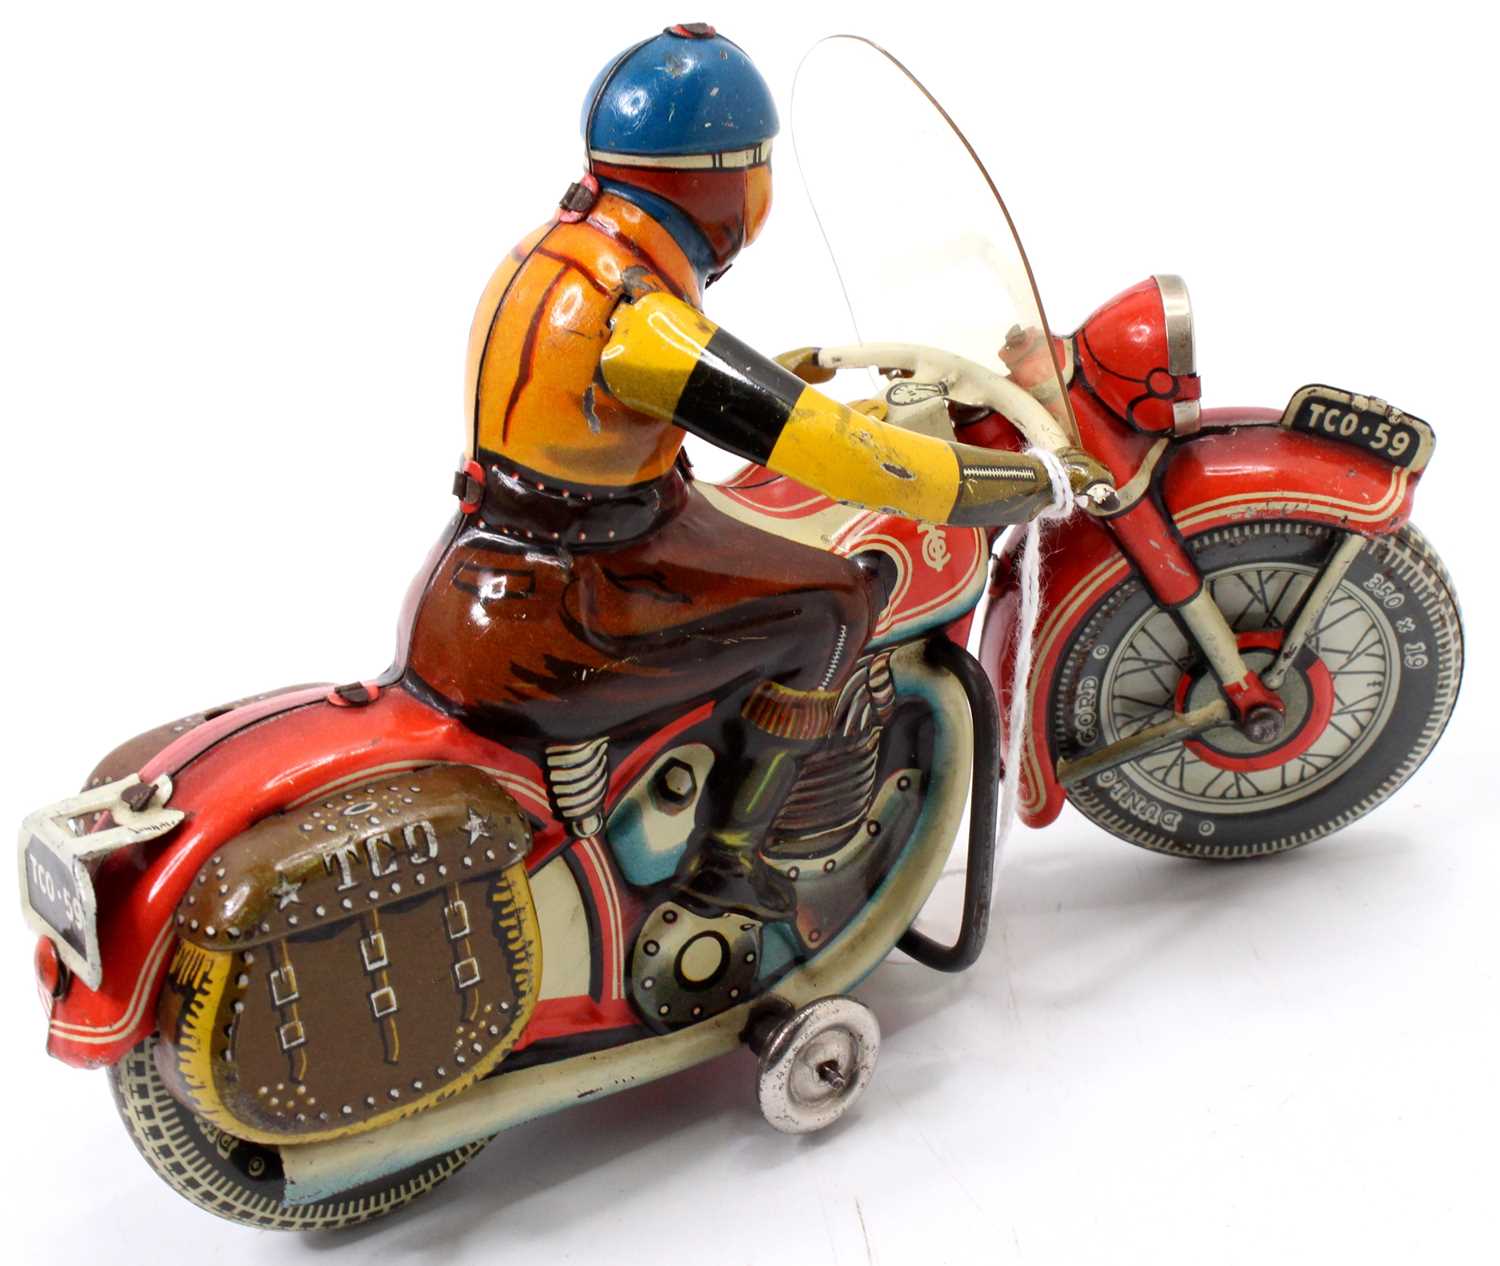 Tipp & Co (Tippco Germany) clockwork tinplate Motorcycle & Rider comprising a red motorcycle with - Image 2 of 3